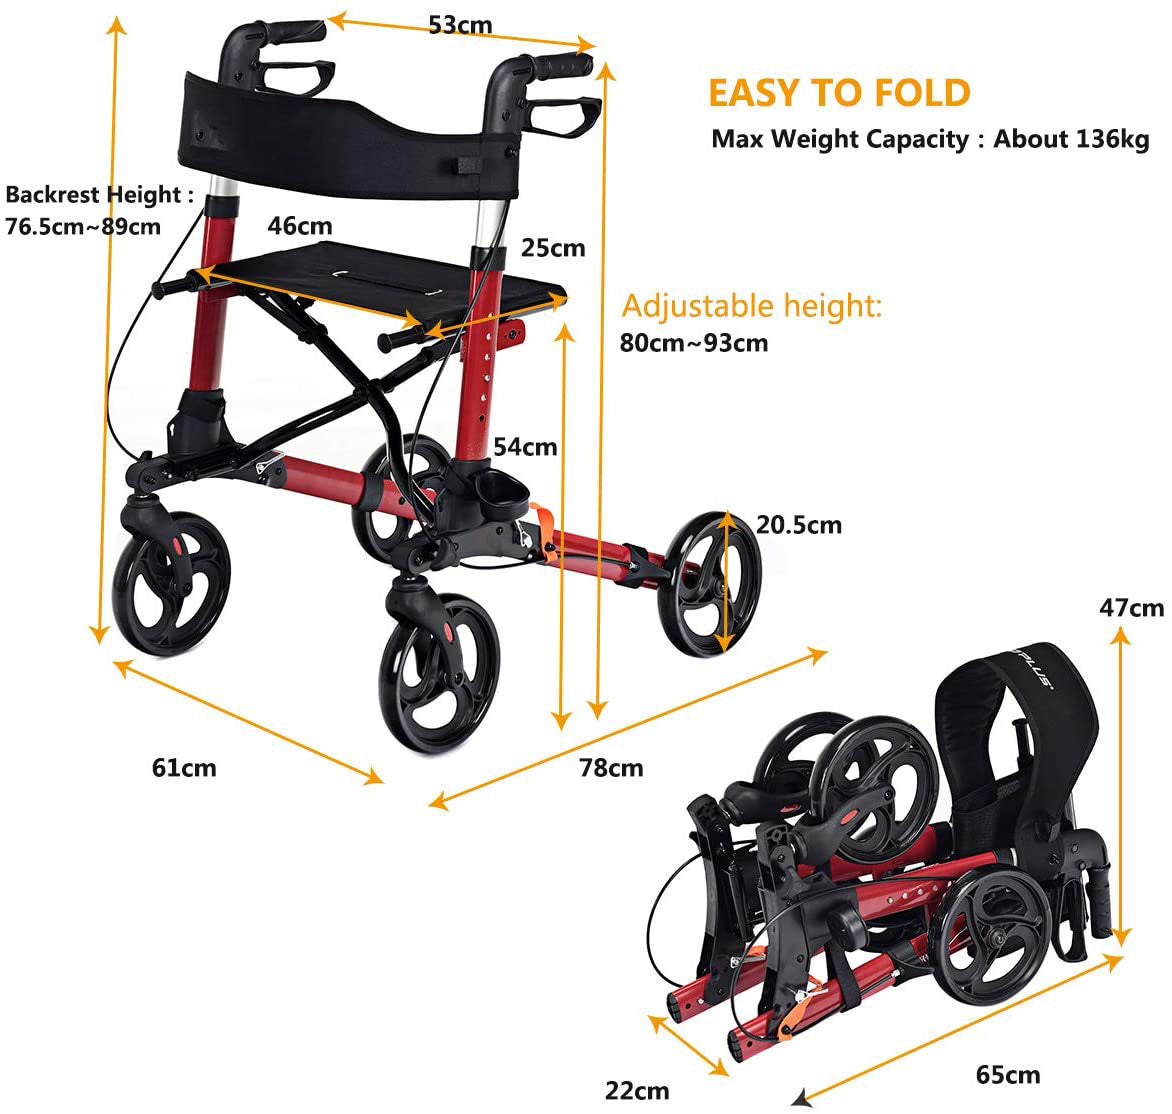 Lightweight Aluminium Folding Walking Mobility Aid With 4 Wheels-Red